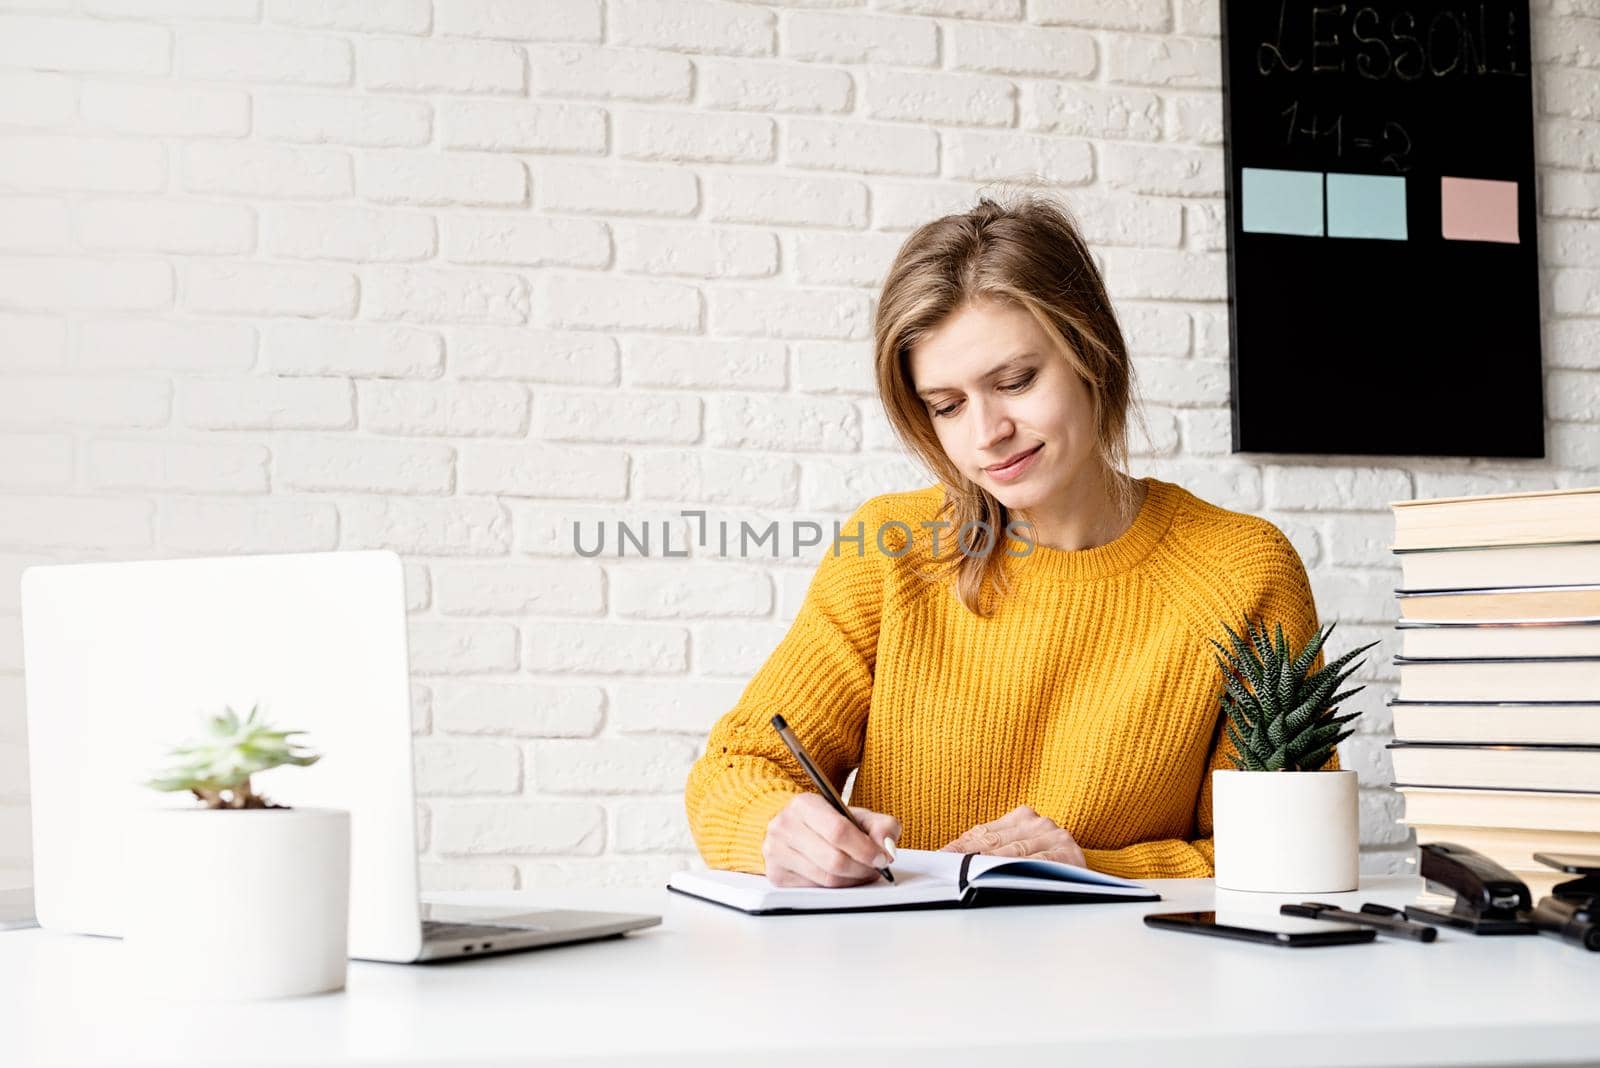 Young smiling woman in yellow sweater studying online using laptop writing in notebook by Desperada